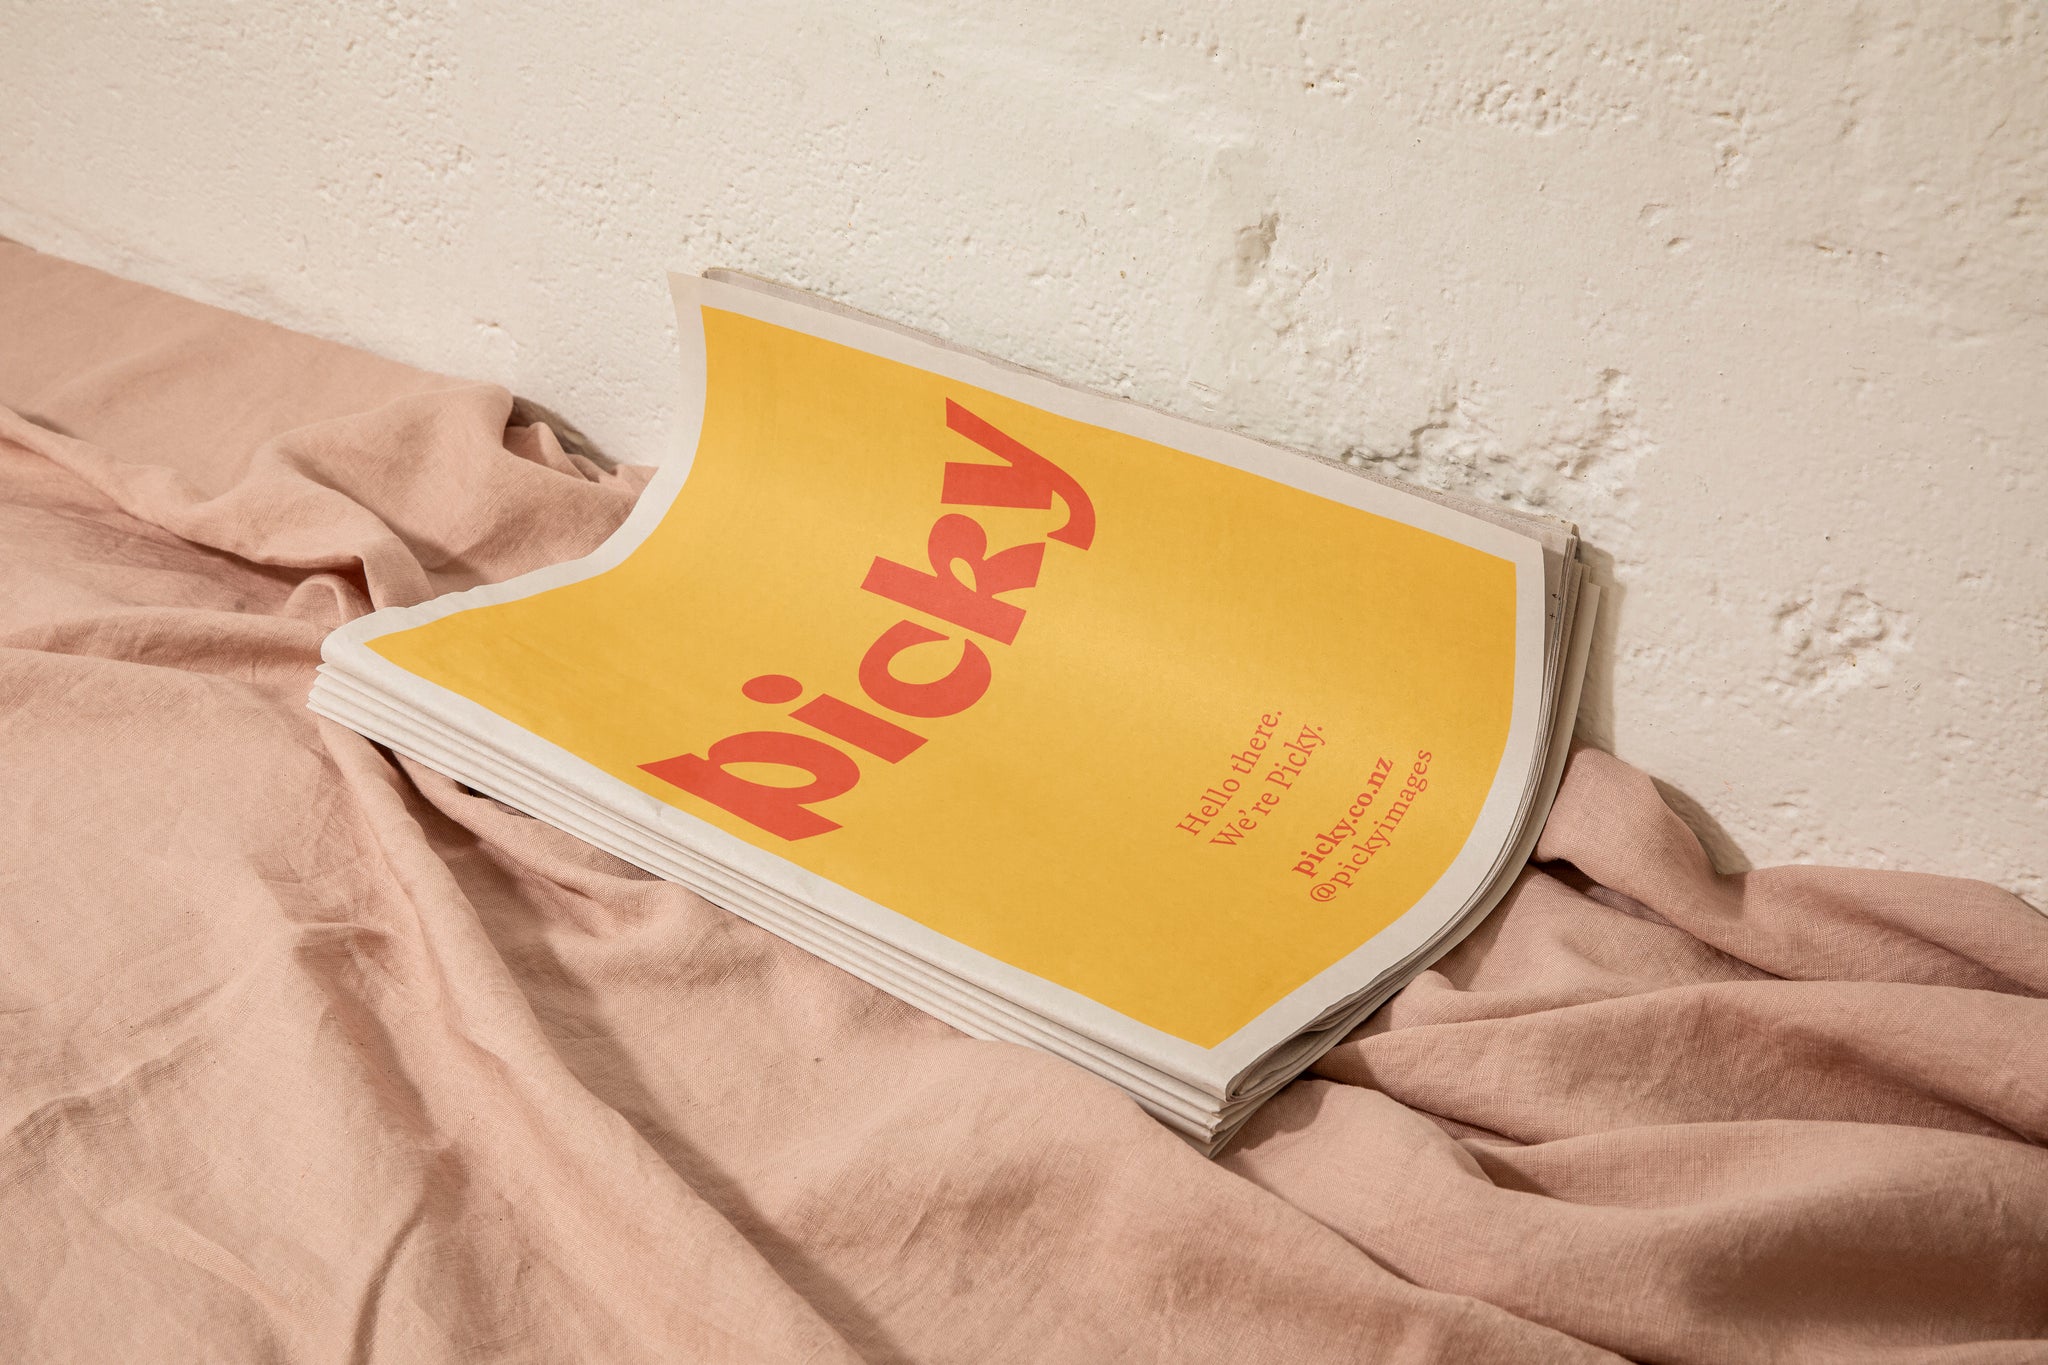 Mockup of a curved tabloid-sized newspaper sitting against a white concrete wall. A light pink cloth sits ruffled underneath.